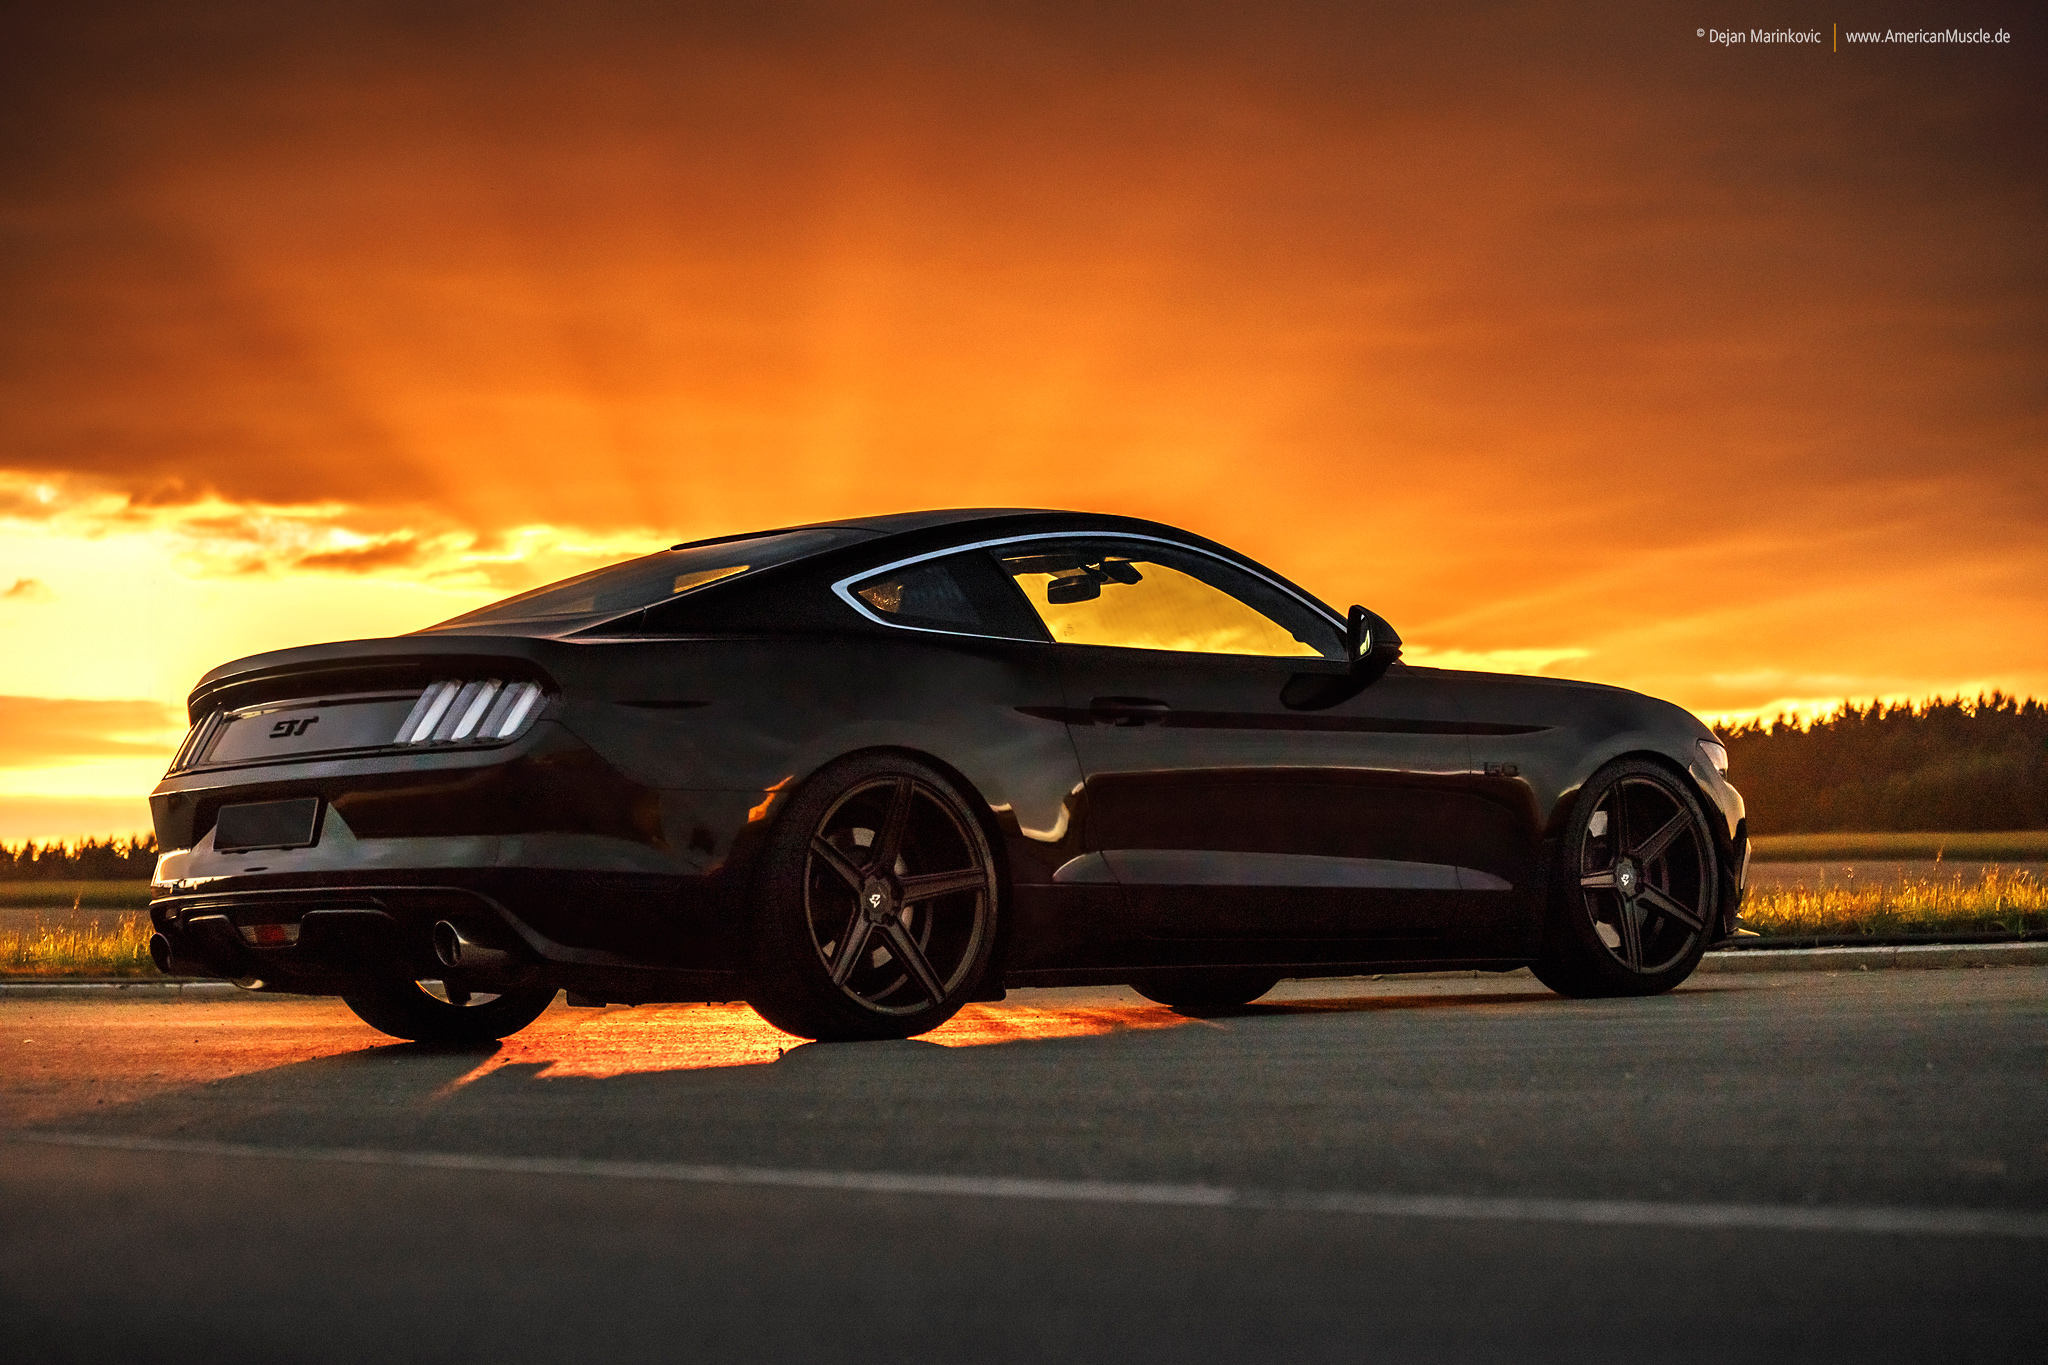 General 2048x1365 car Ford Mustang Ford black cars muscle cars American cars watermarked